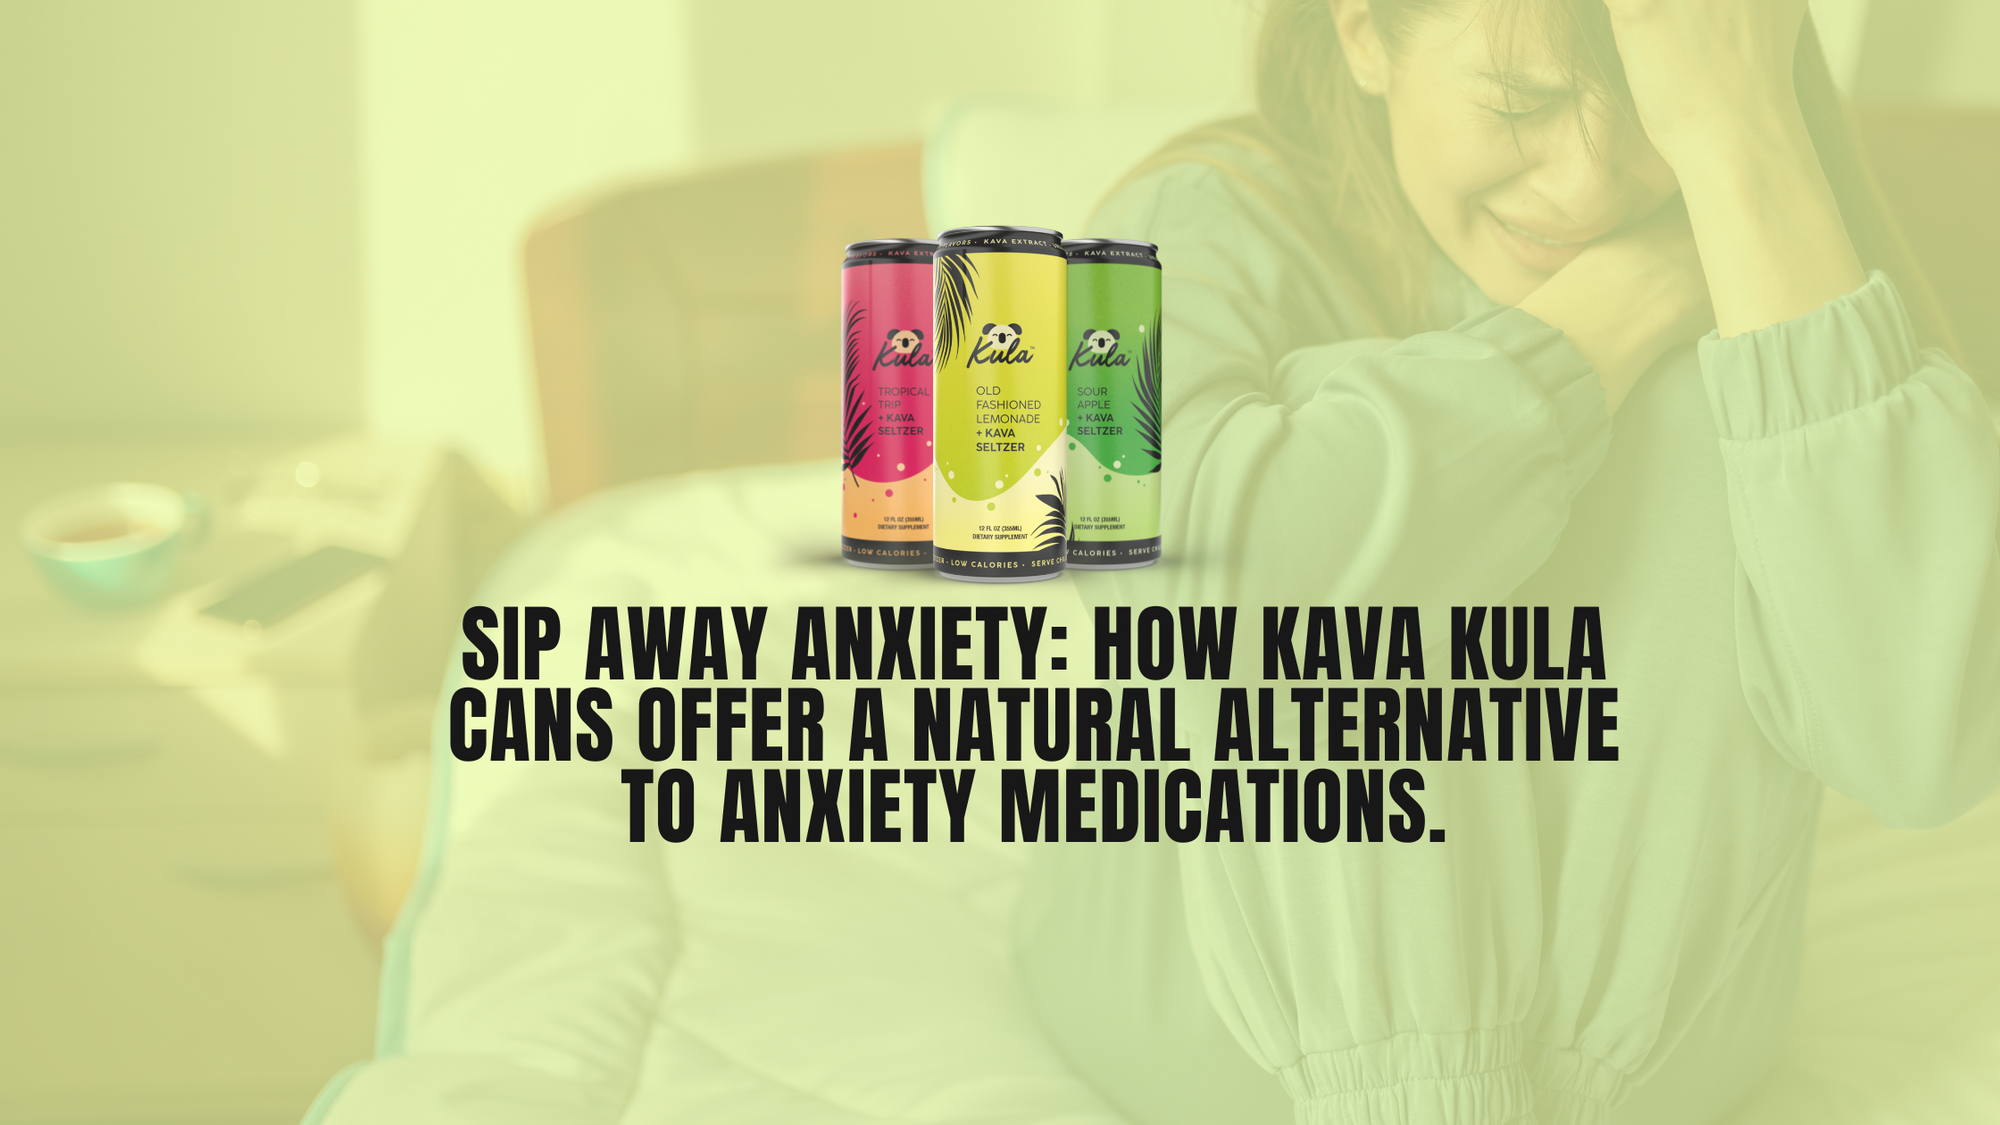 Sip Away Anxiety: How Kava Kula Cans Offer a Natural Alternative to Anxiety Medications.